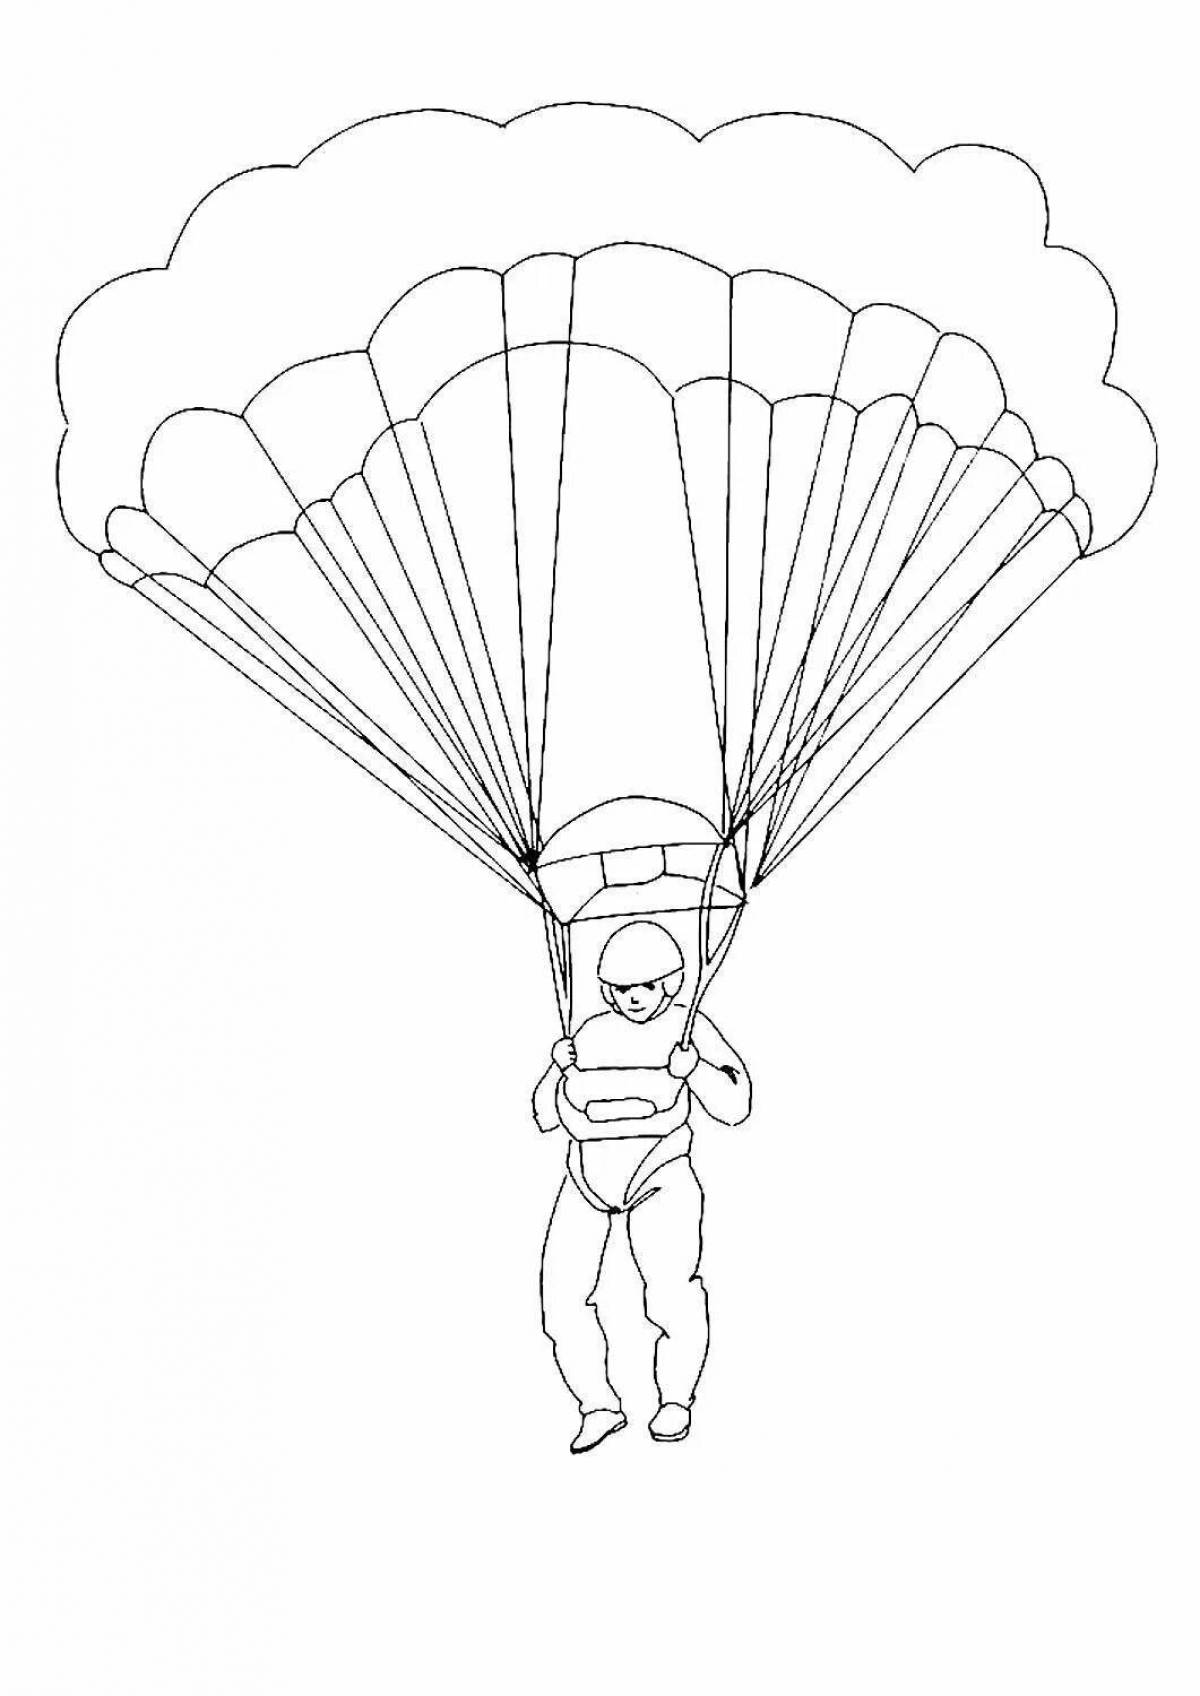 Attractive parachute coloring page for kids